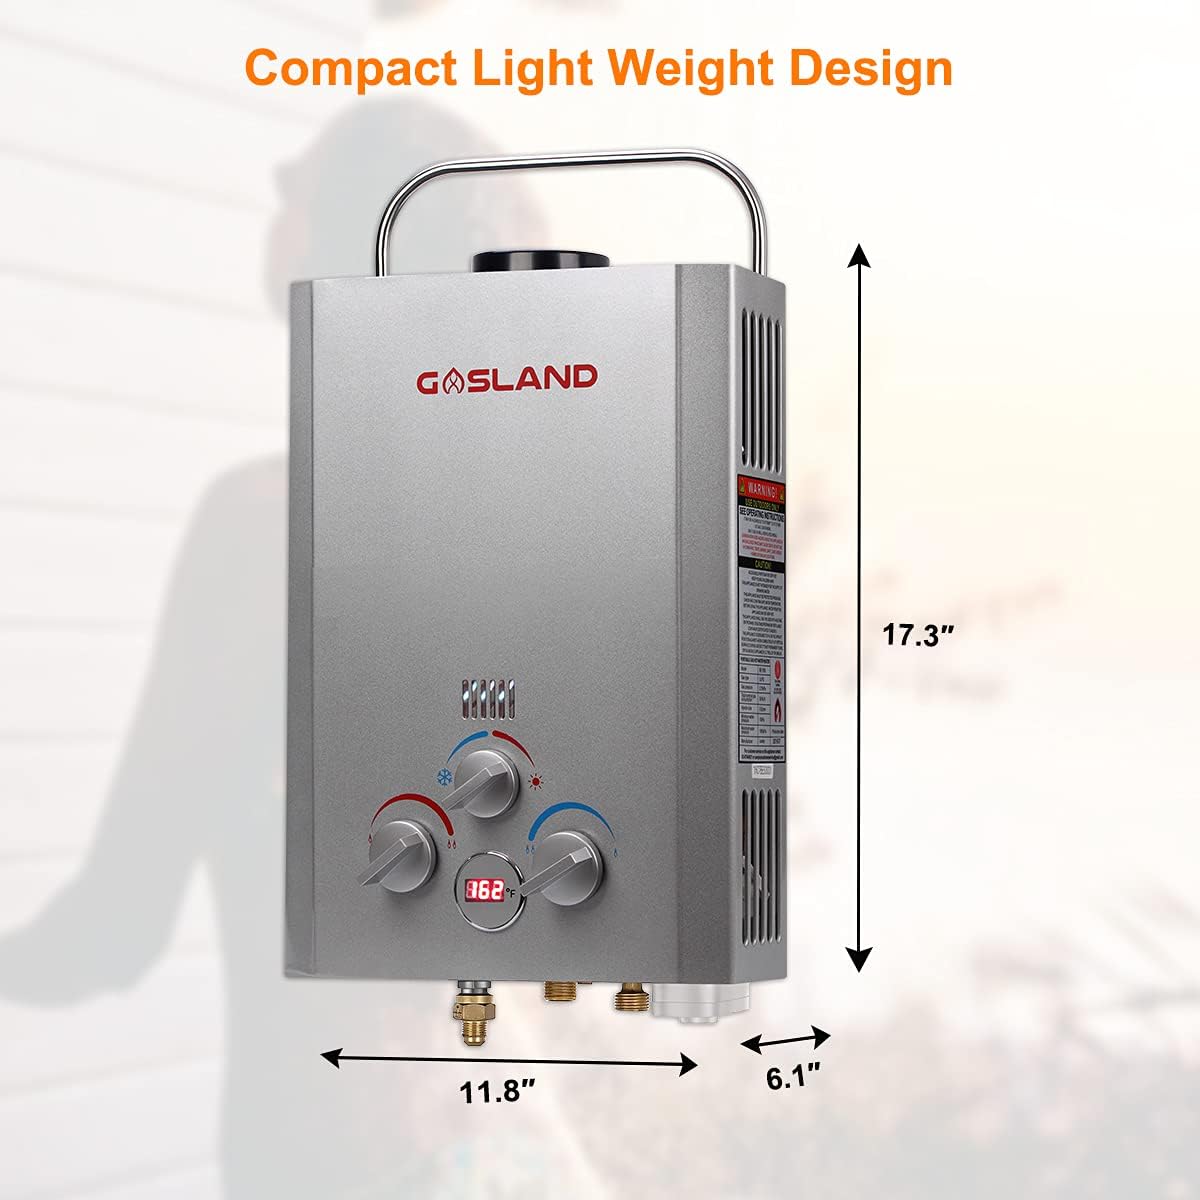 Tankless Water Heater, GASLAND Outdoors BE158S 1.58GPM 6L Portable Gas Water Heater, Propane Water Heater for RV Camping Cabin Barn Boat, Overheating Protection, Easy Installation - GASLAND Outdoors BE158S 6L Portable Gas Water Heater Review